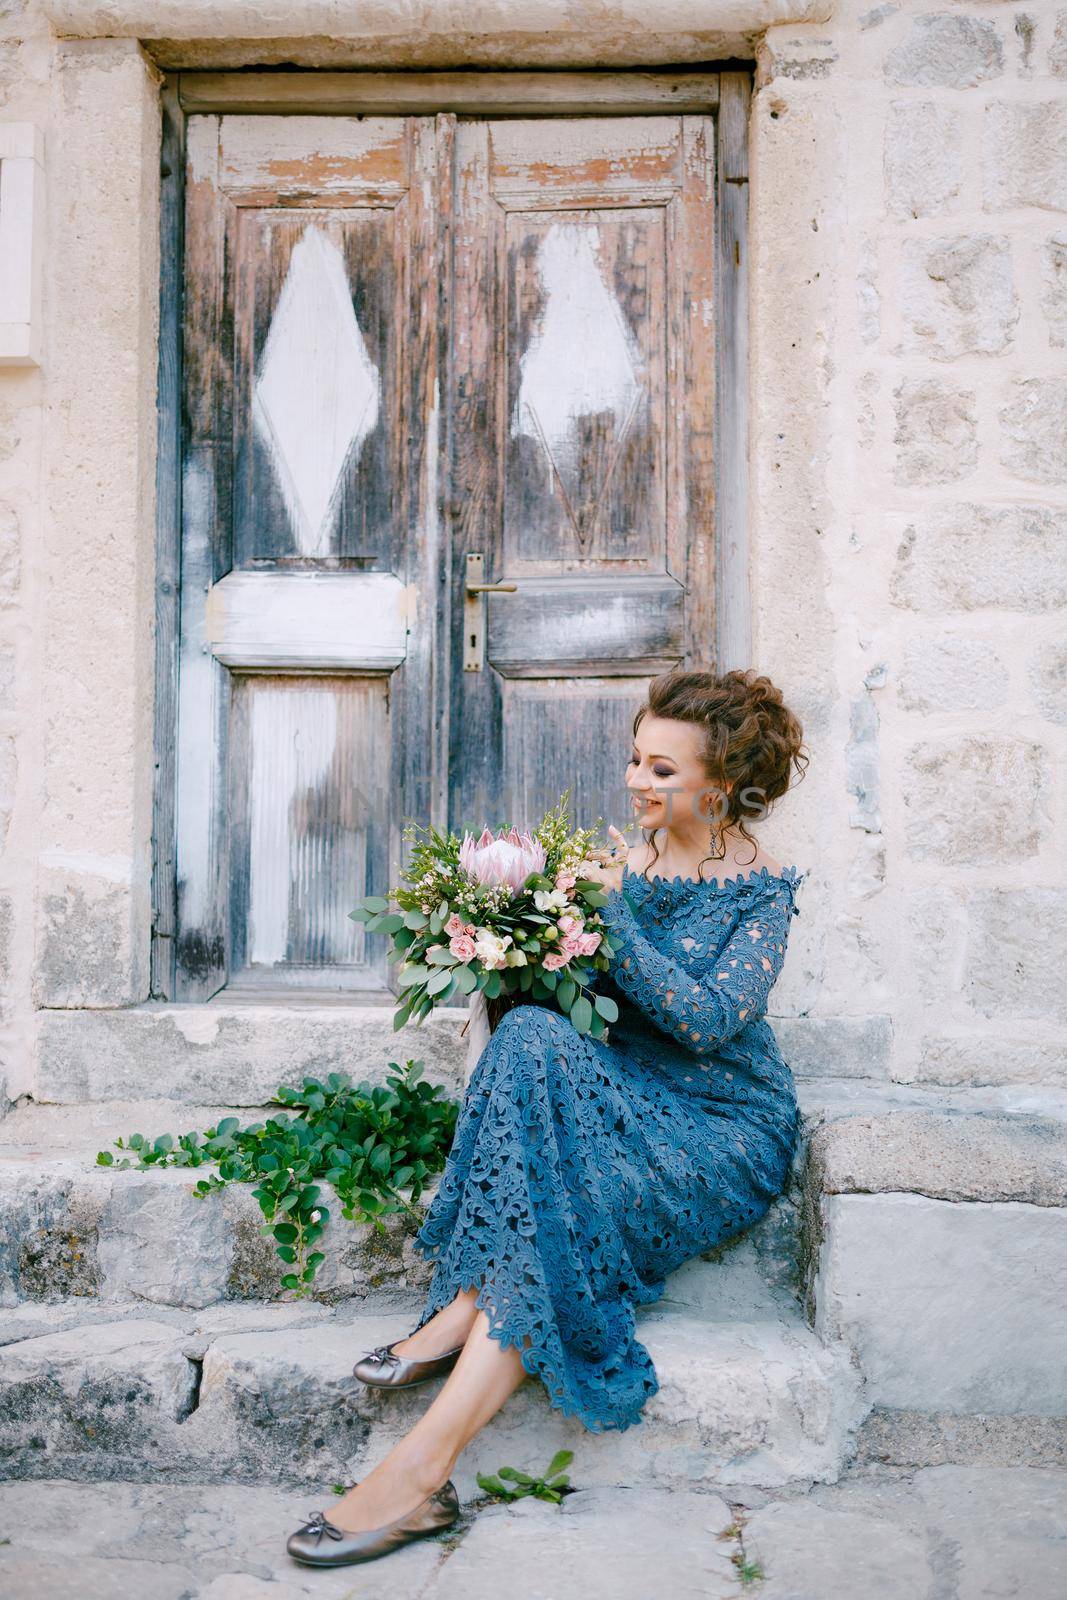 A bride in a stylish blue dress with a bouquet in her hands sits on the steps near an old wooden door by Nadtochiy